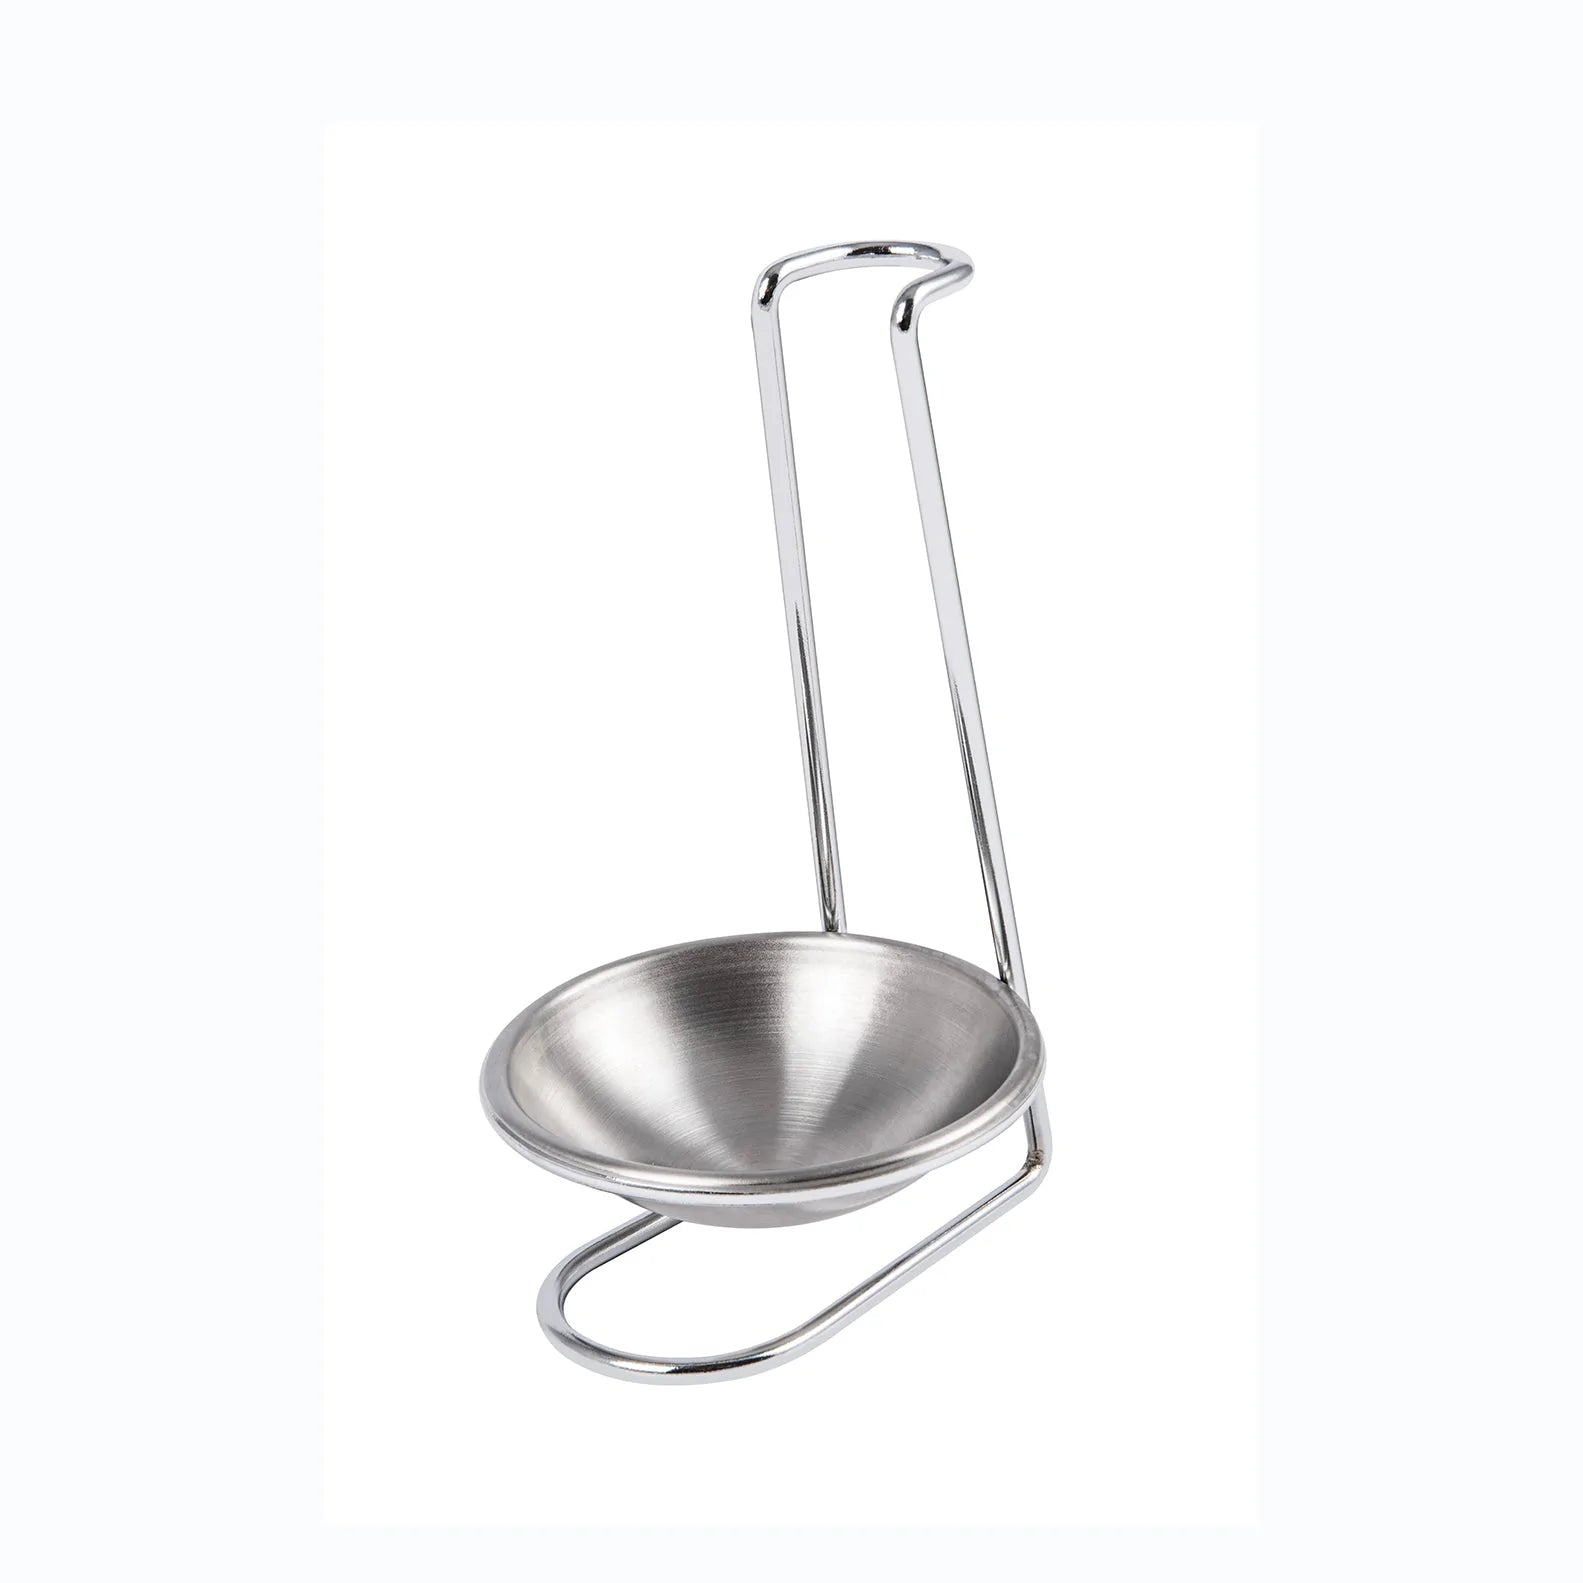 Pioggia ladder in steel with removable cup -28.5cm